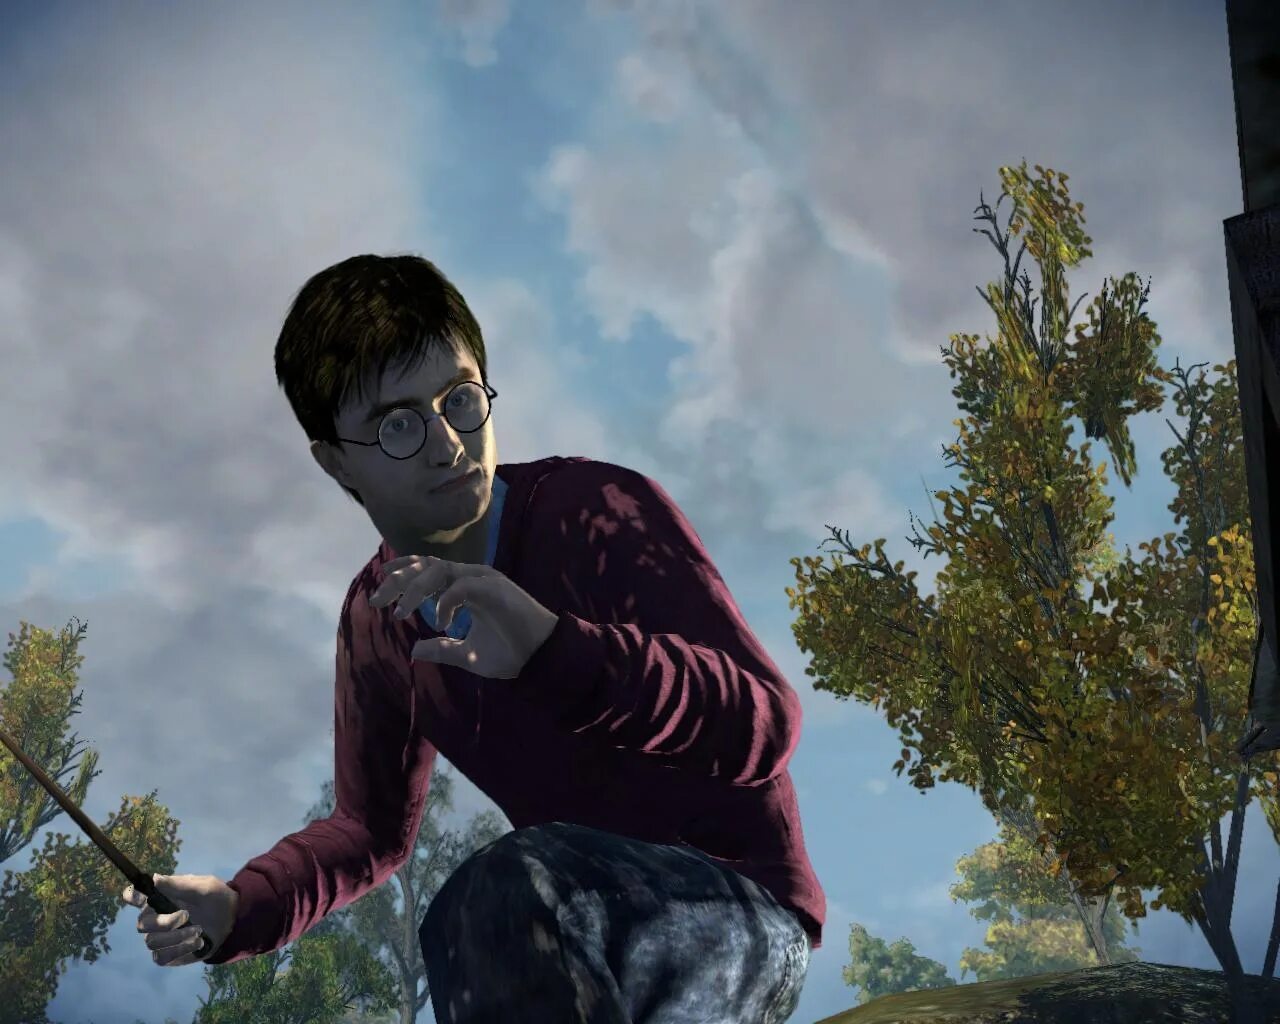 Harry Potter and the Deathly Hallows: Part i. Harry Potter and the Deathly Hallows: Part 1 (2010). Part one game